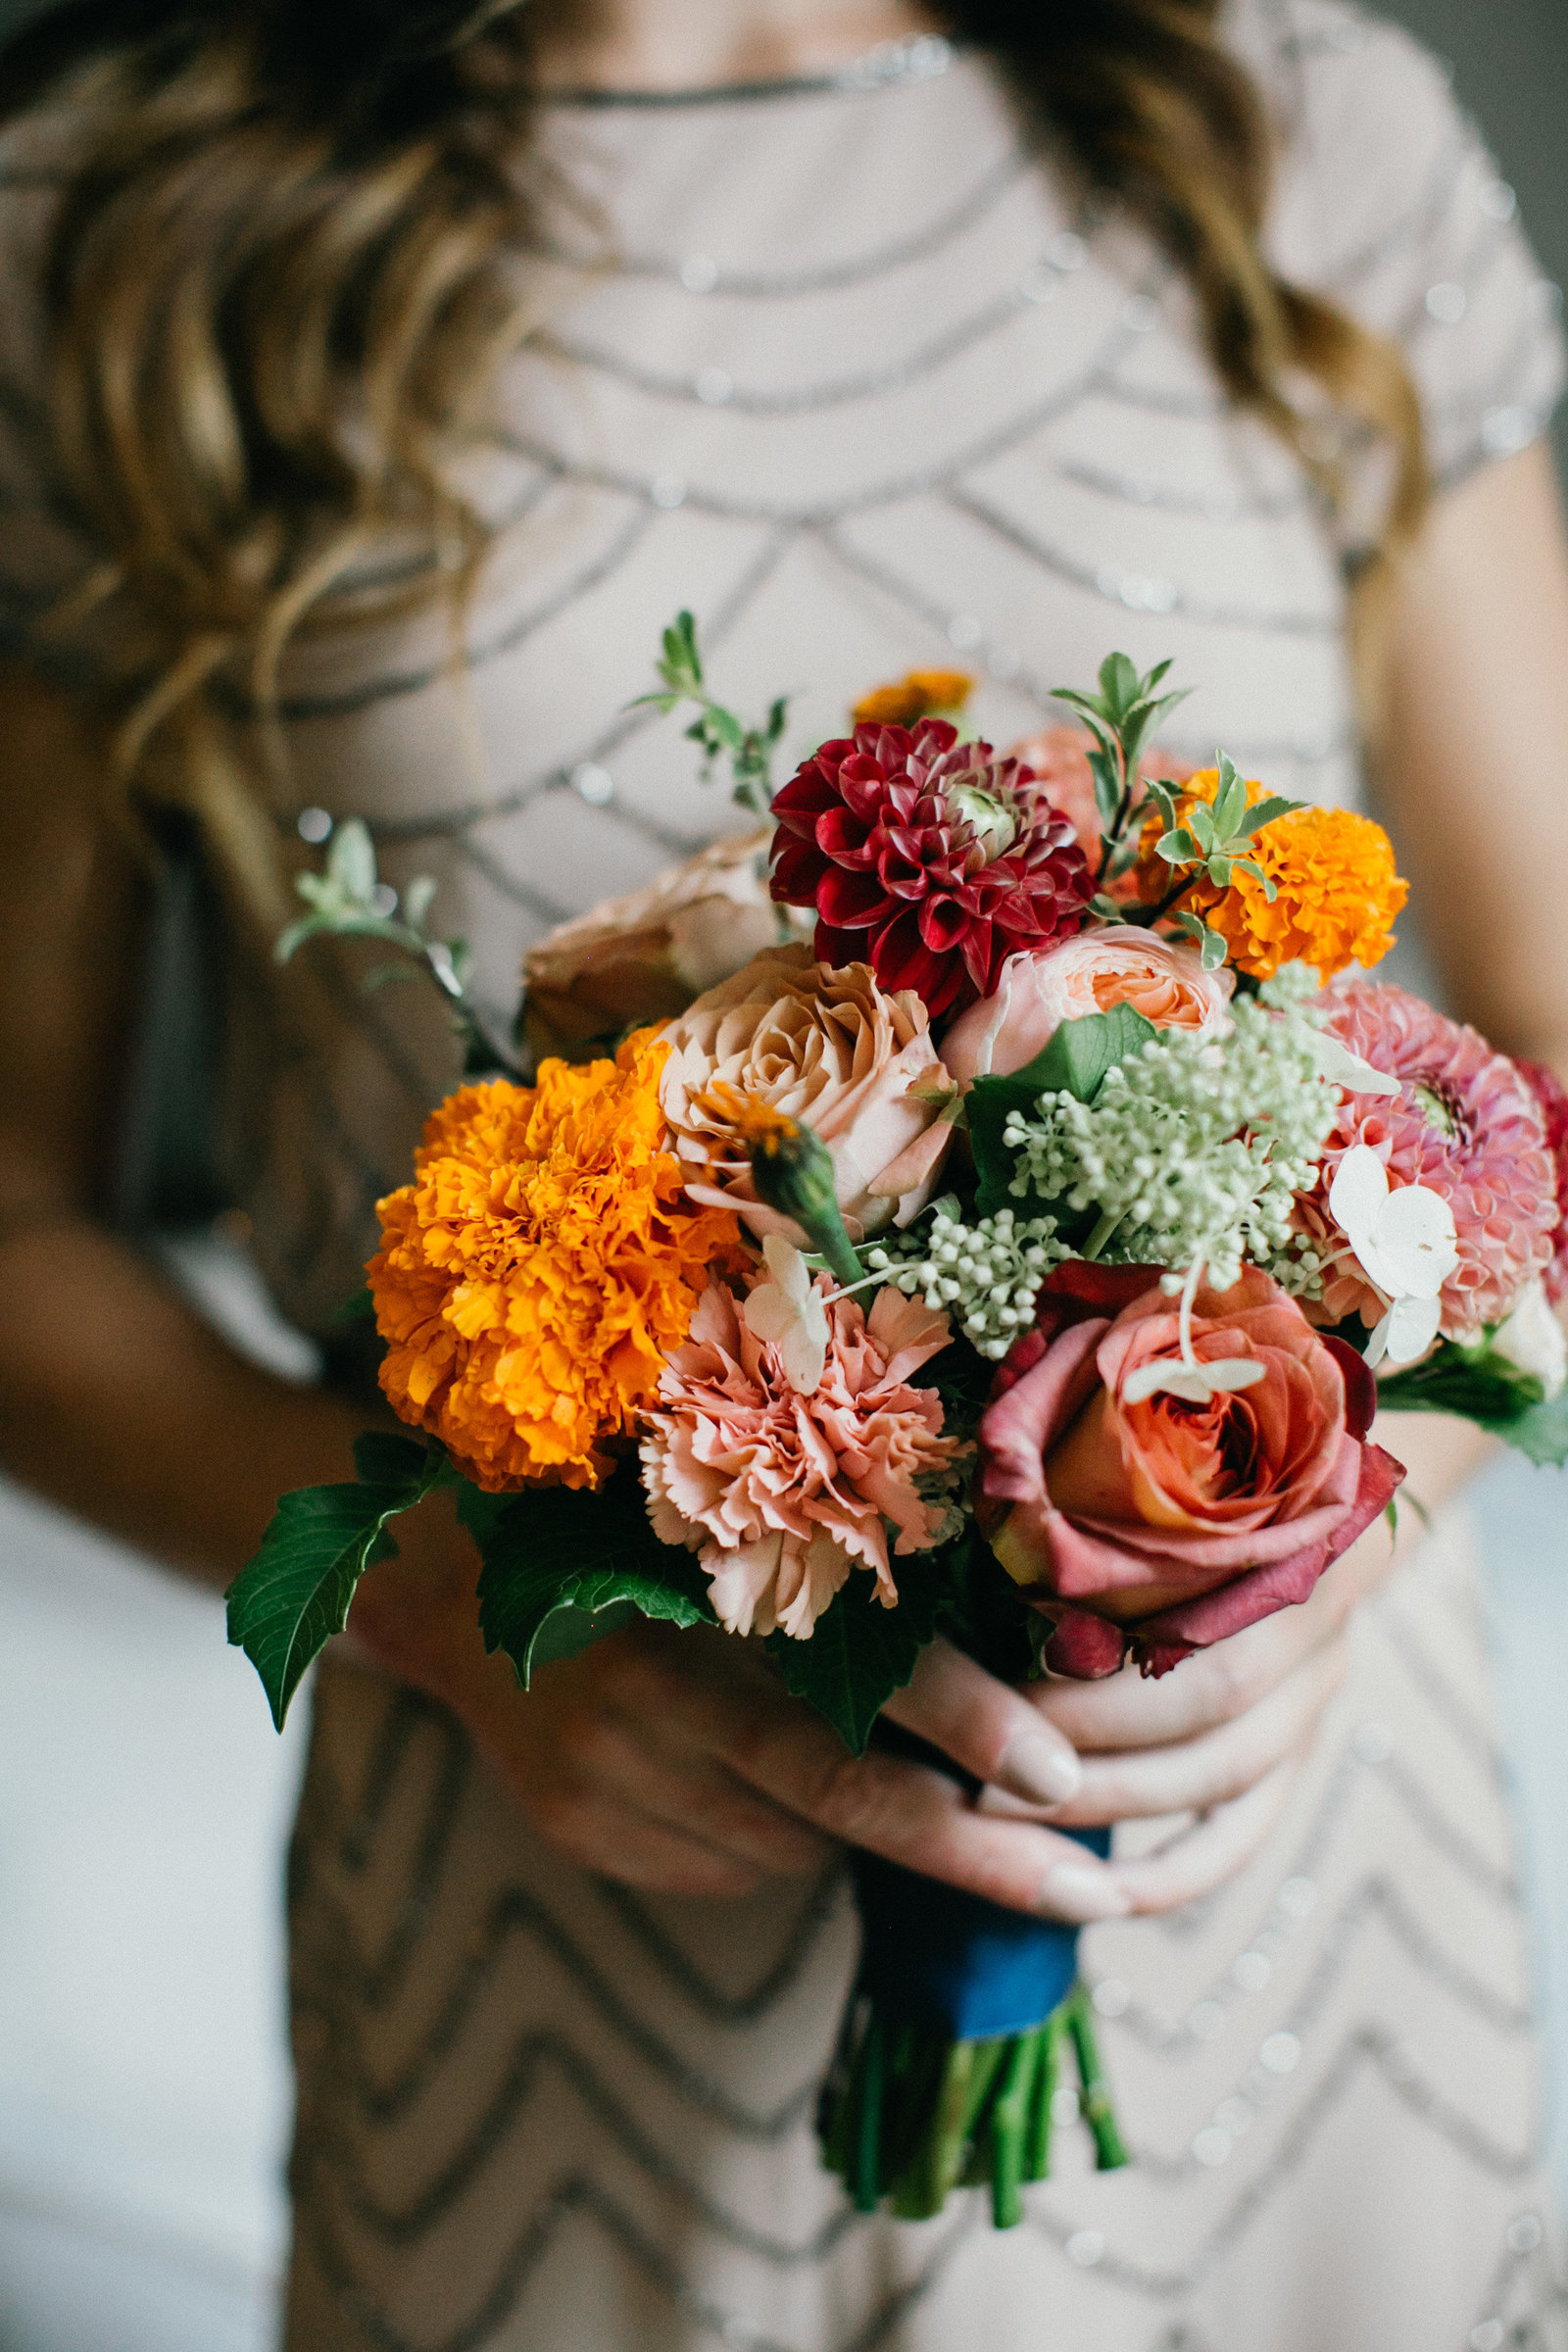 Colorful bouquets for the bridesmaids!